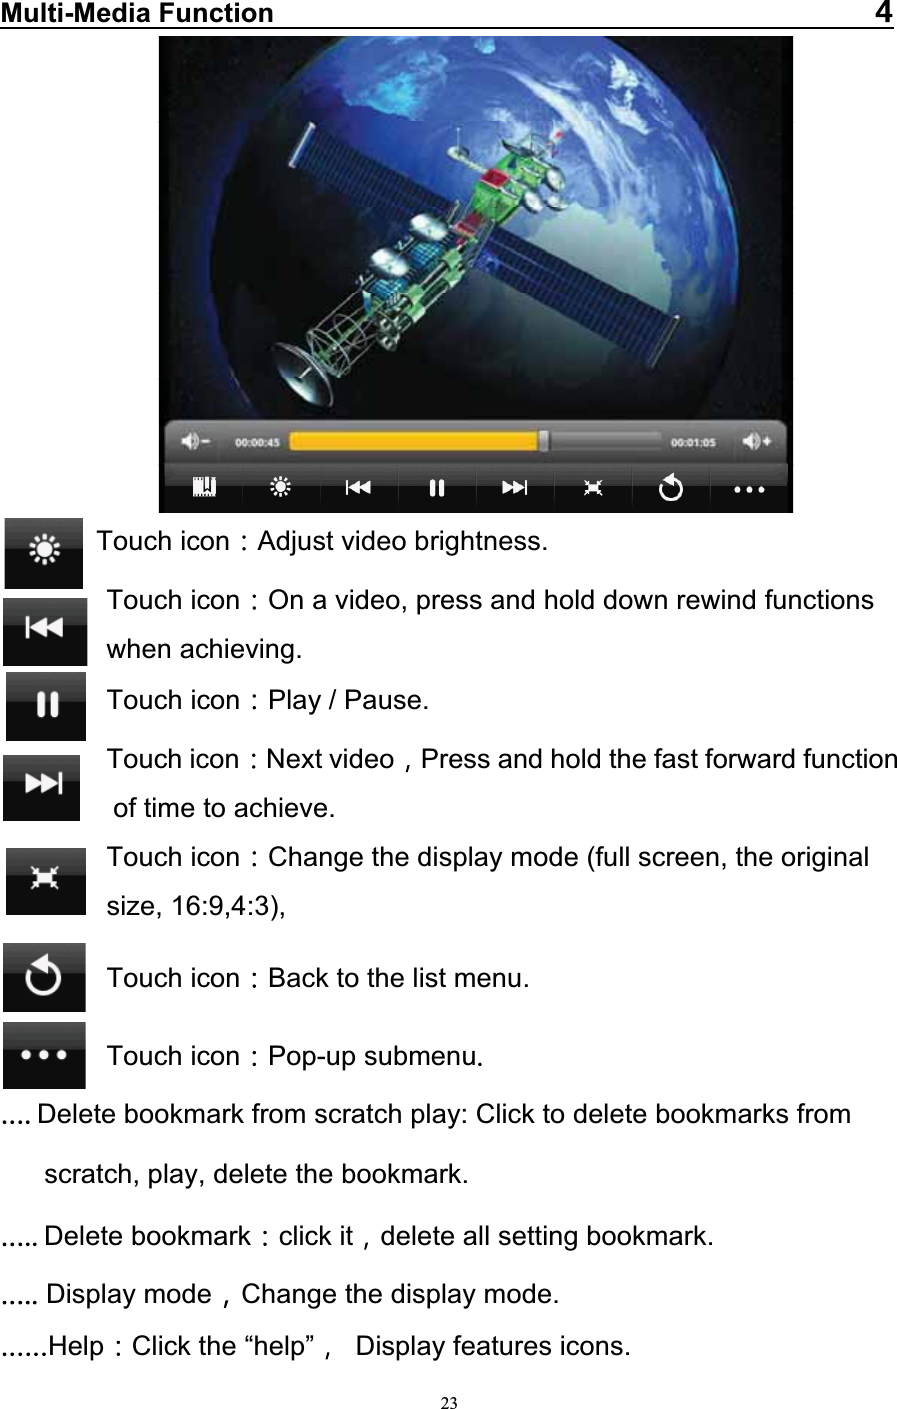   23Multi-Media Function   Touch icon Adjust video brightness.  Touch icon On a video, press and hold down rewind functions   when achieving. Touch icon Play / Pause.  Touch icon Next video Press and hold the fast forward function of time to achieve.  Touch icon Change the display mode (full screen, the original size, 16:9,4:3), Touch icon Back to the list menu. Touch icon Pop-up submenu Delete bookmark from scratch play: Click to delete bookmarks from scratch, play, delete the bookmark. Delete bookmark click it delete all setting bookmark.  Display mode Change the display mode.Help Click the “help”  Display features icons. 